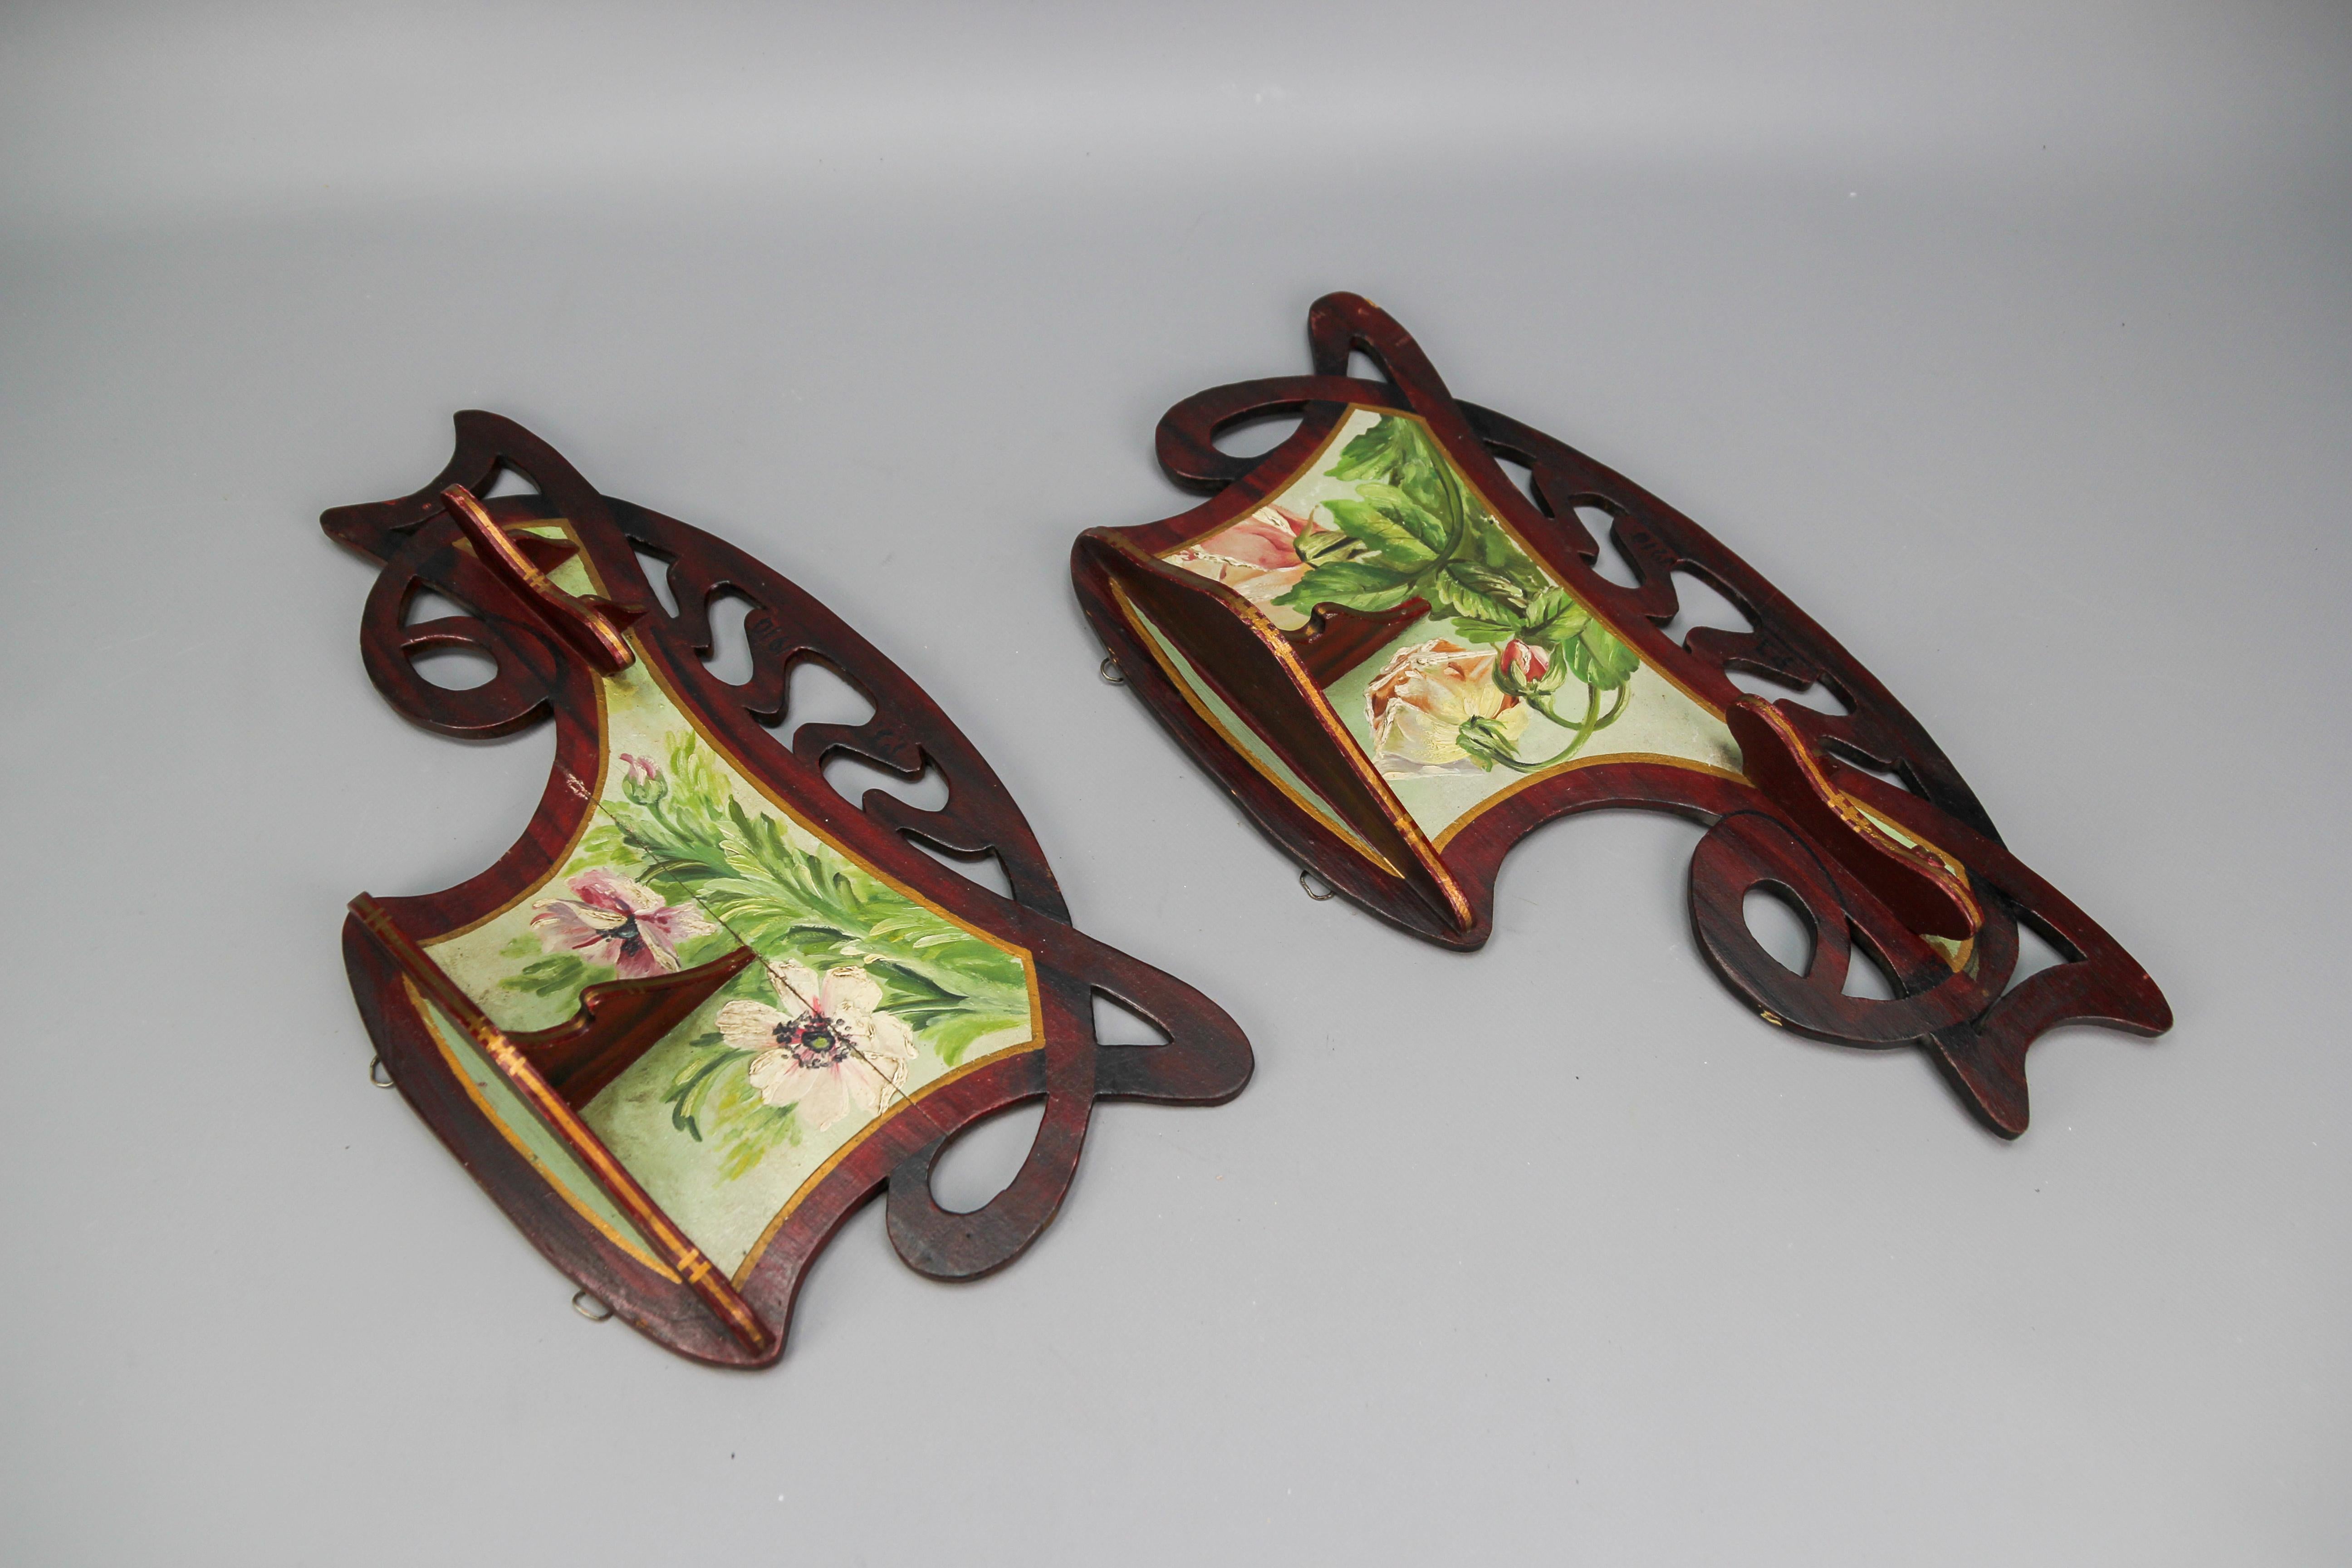 Pair of Art Nouveau Wooden Hand-Painted Floral Shelves, Germany, 1910 For Sale 1